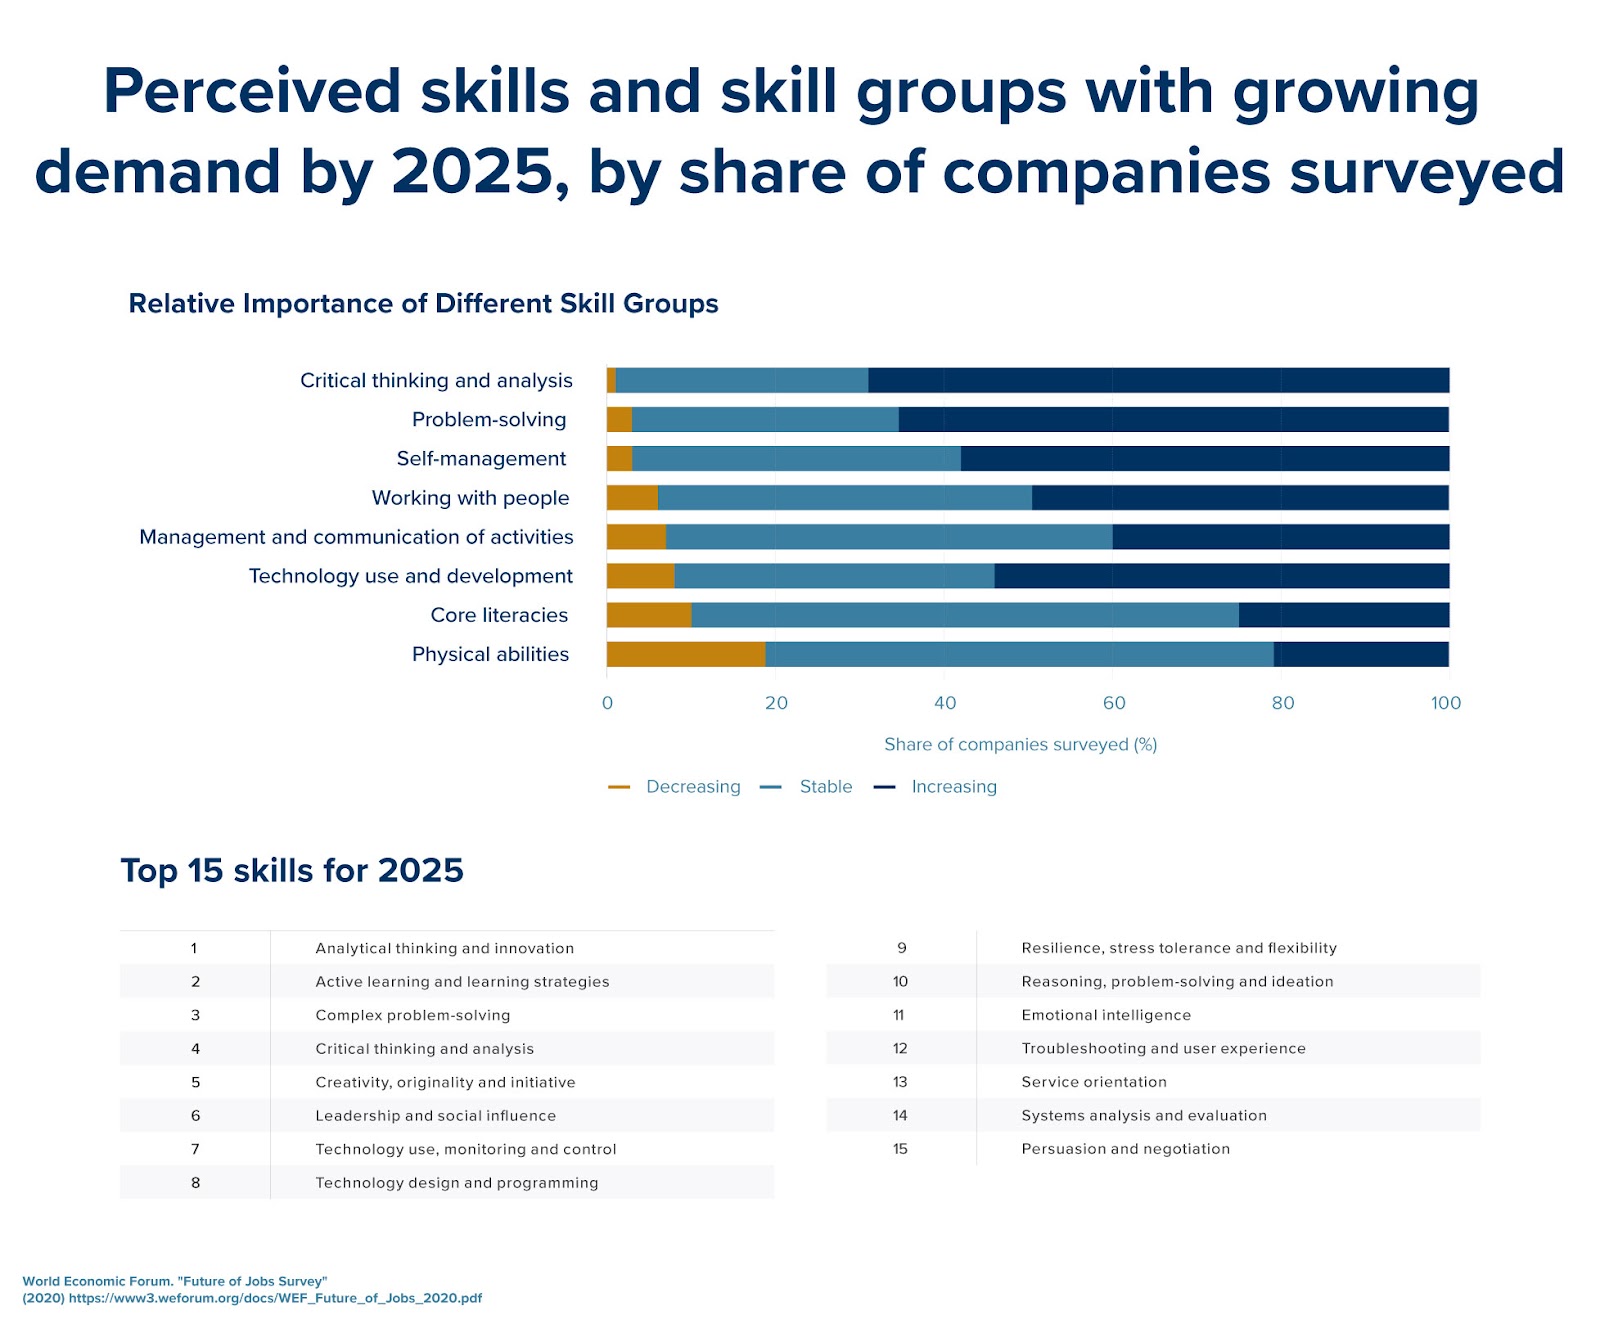 A chart that highlights the perceived skills and skill groups with growing demand through 2025.